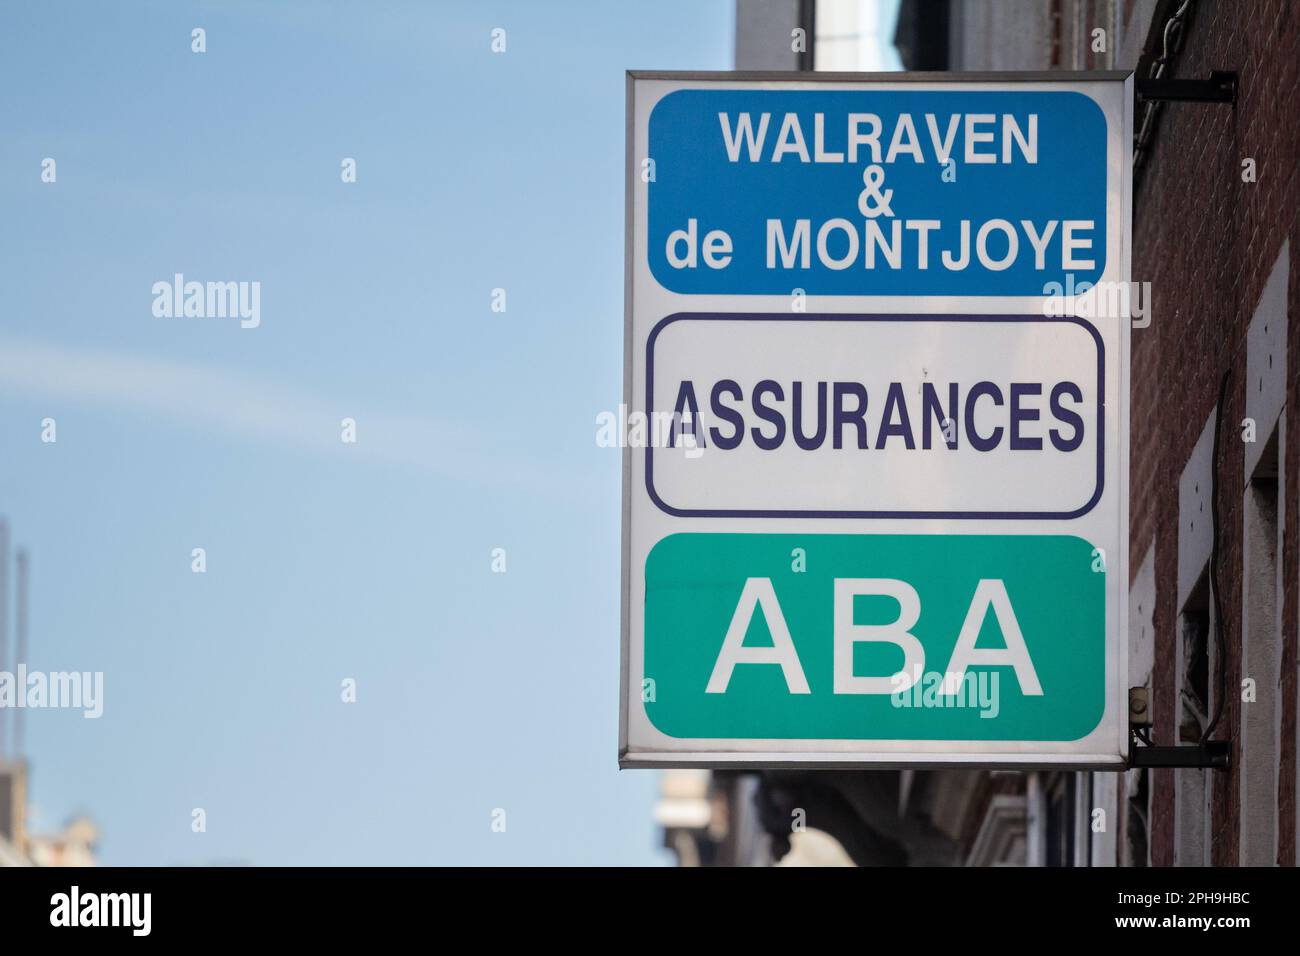 Picture of a sign with the logo of walraven et de montjoye insurances, a local insurer, called assurances, in the city center of Liege, in Belgium. Stock Photo